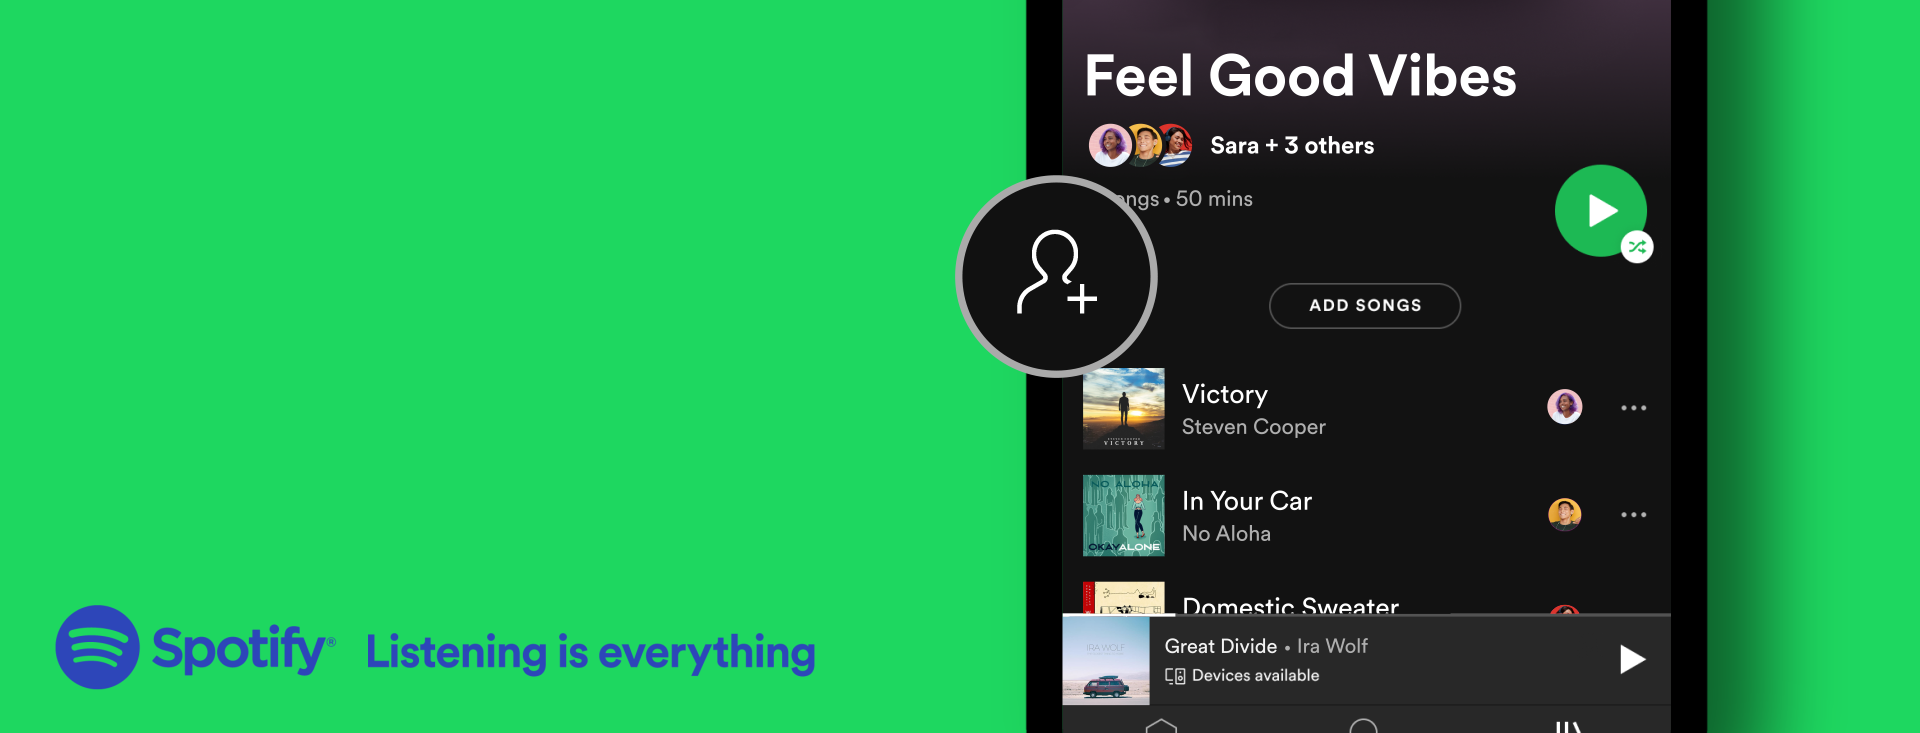 spotify add current song to playlist bettertouchtool